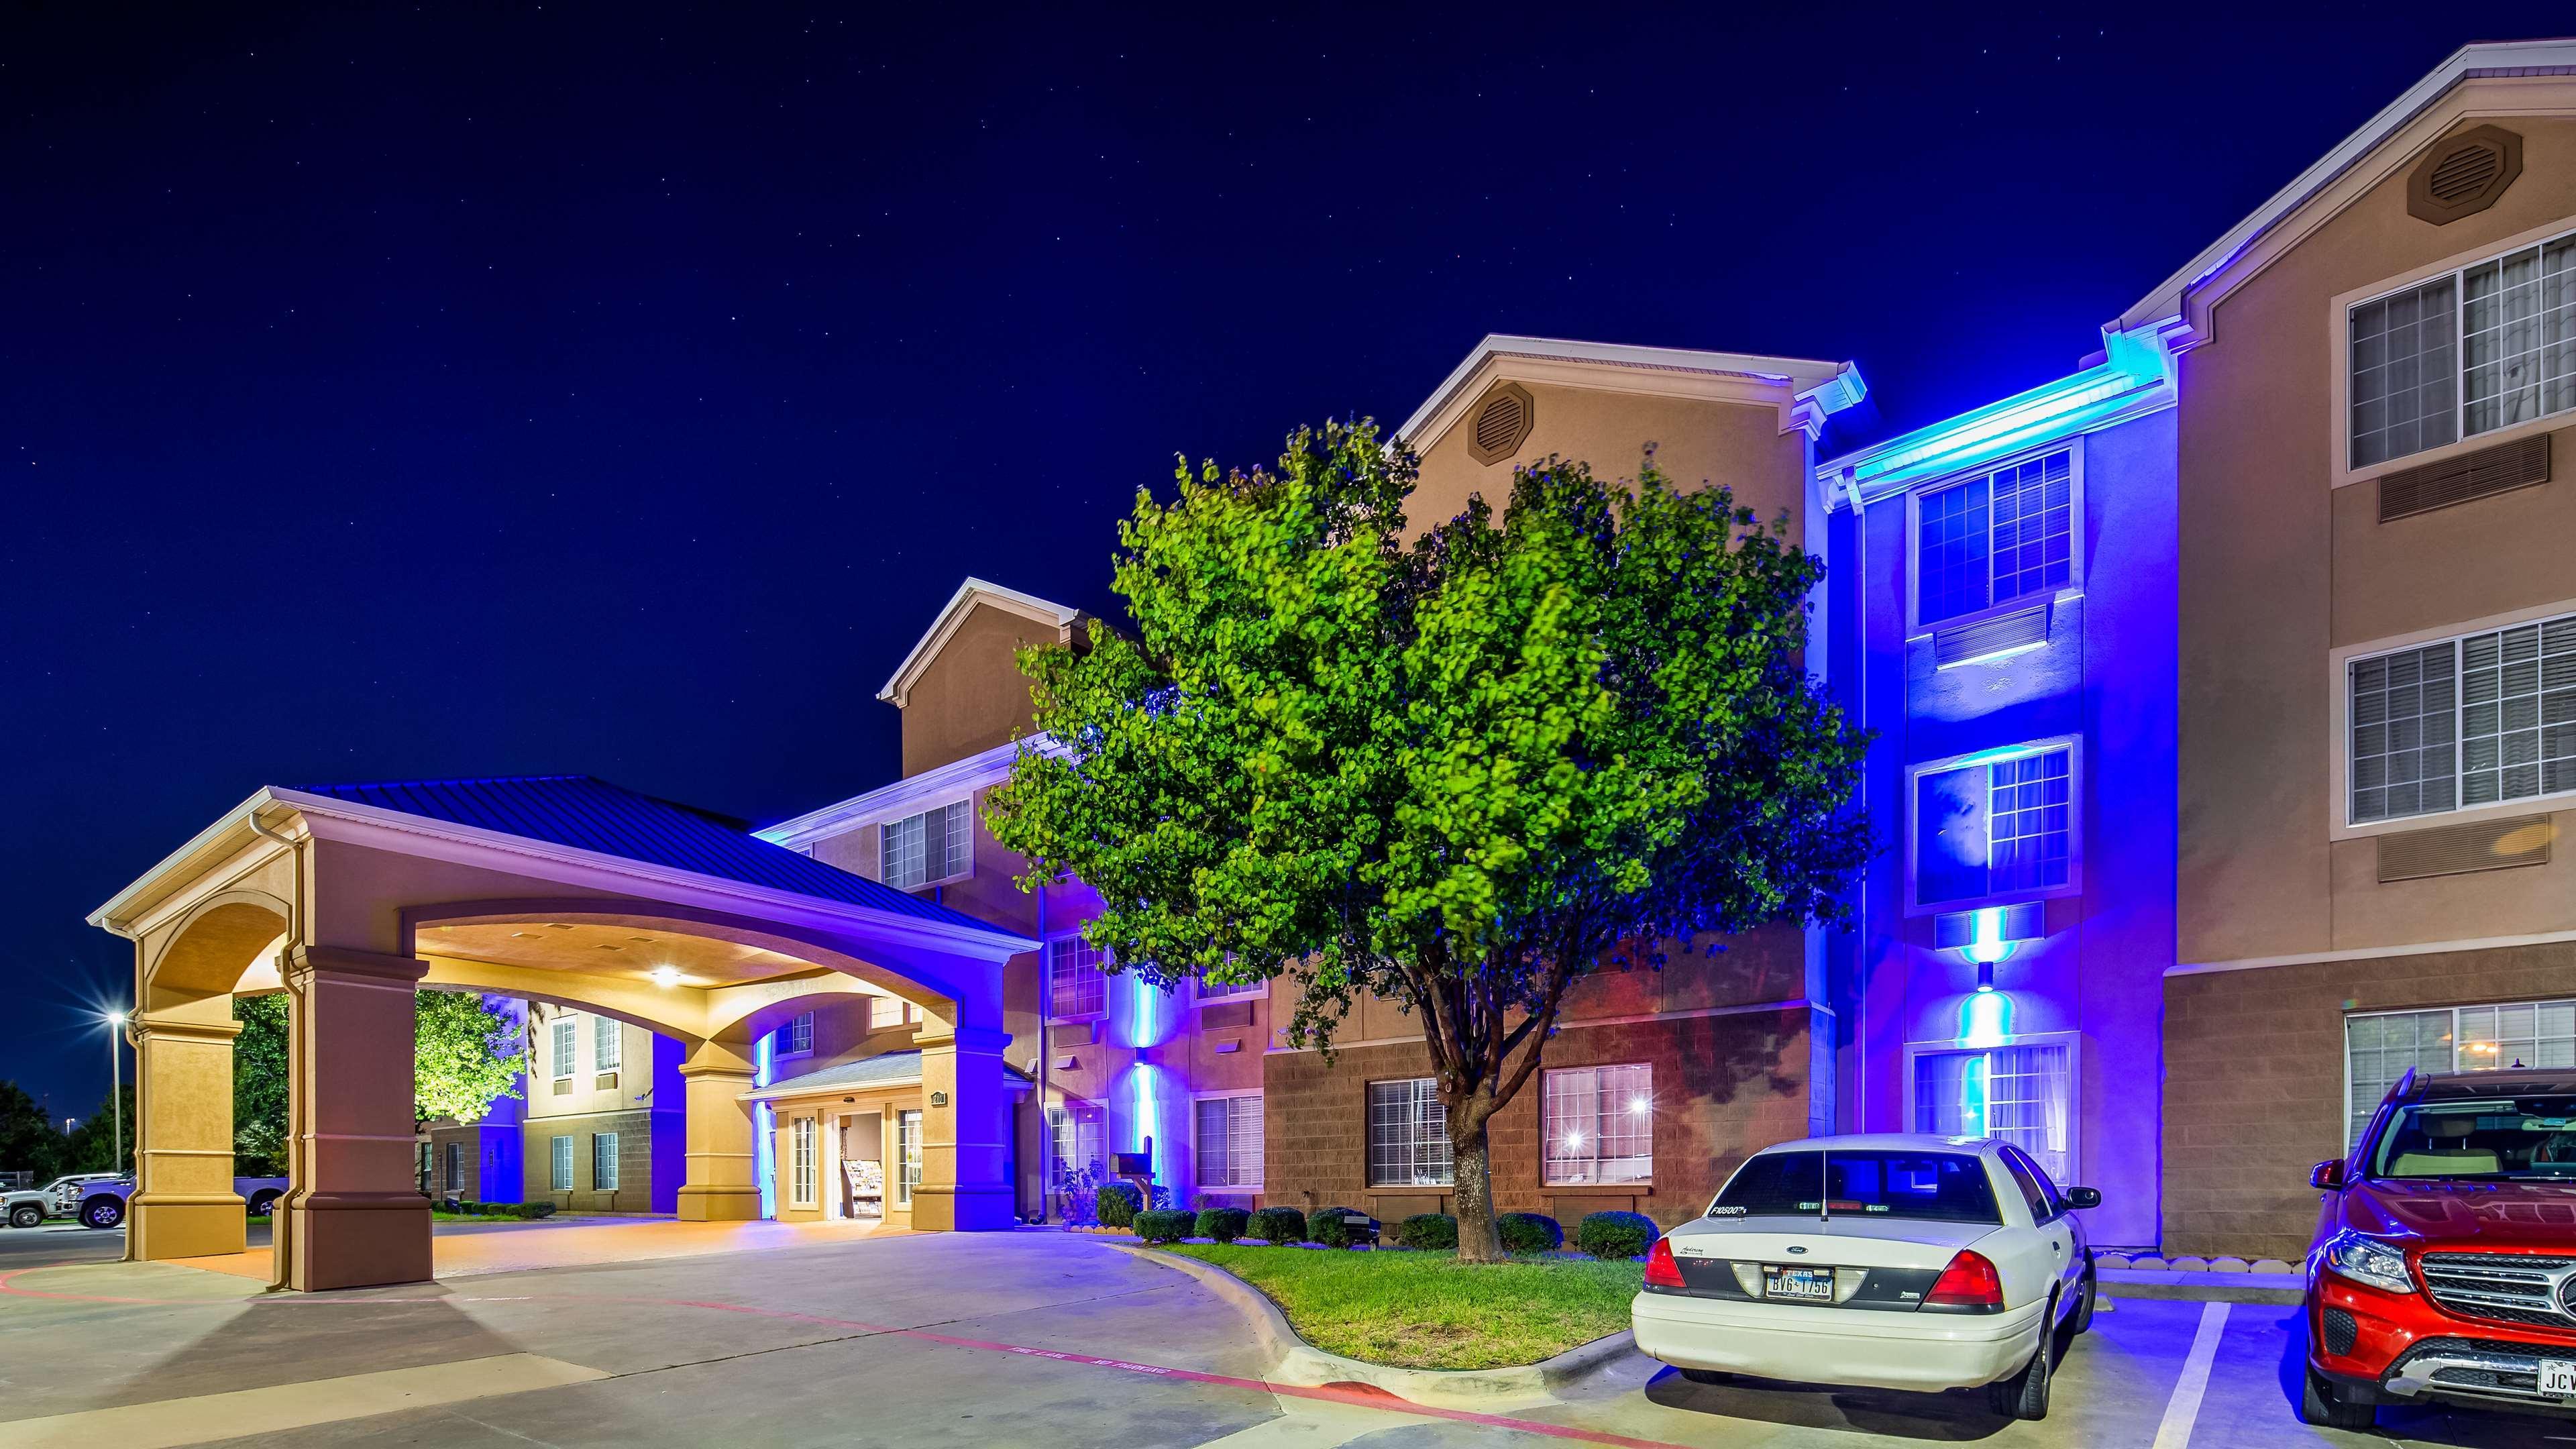 Best Western Plus Cutting Horse Inn & Suites Weatherford Exterior photo